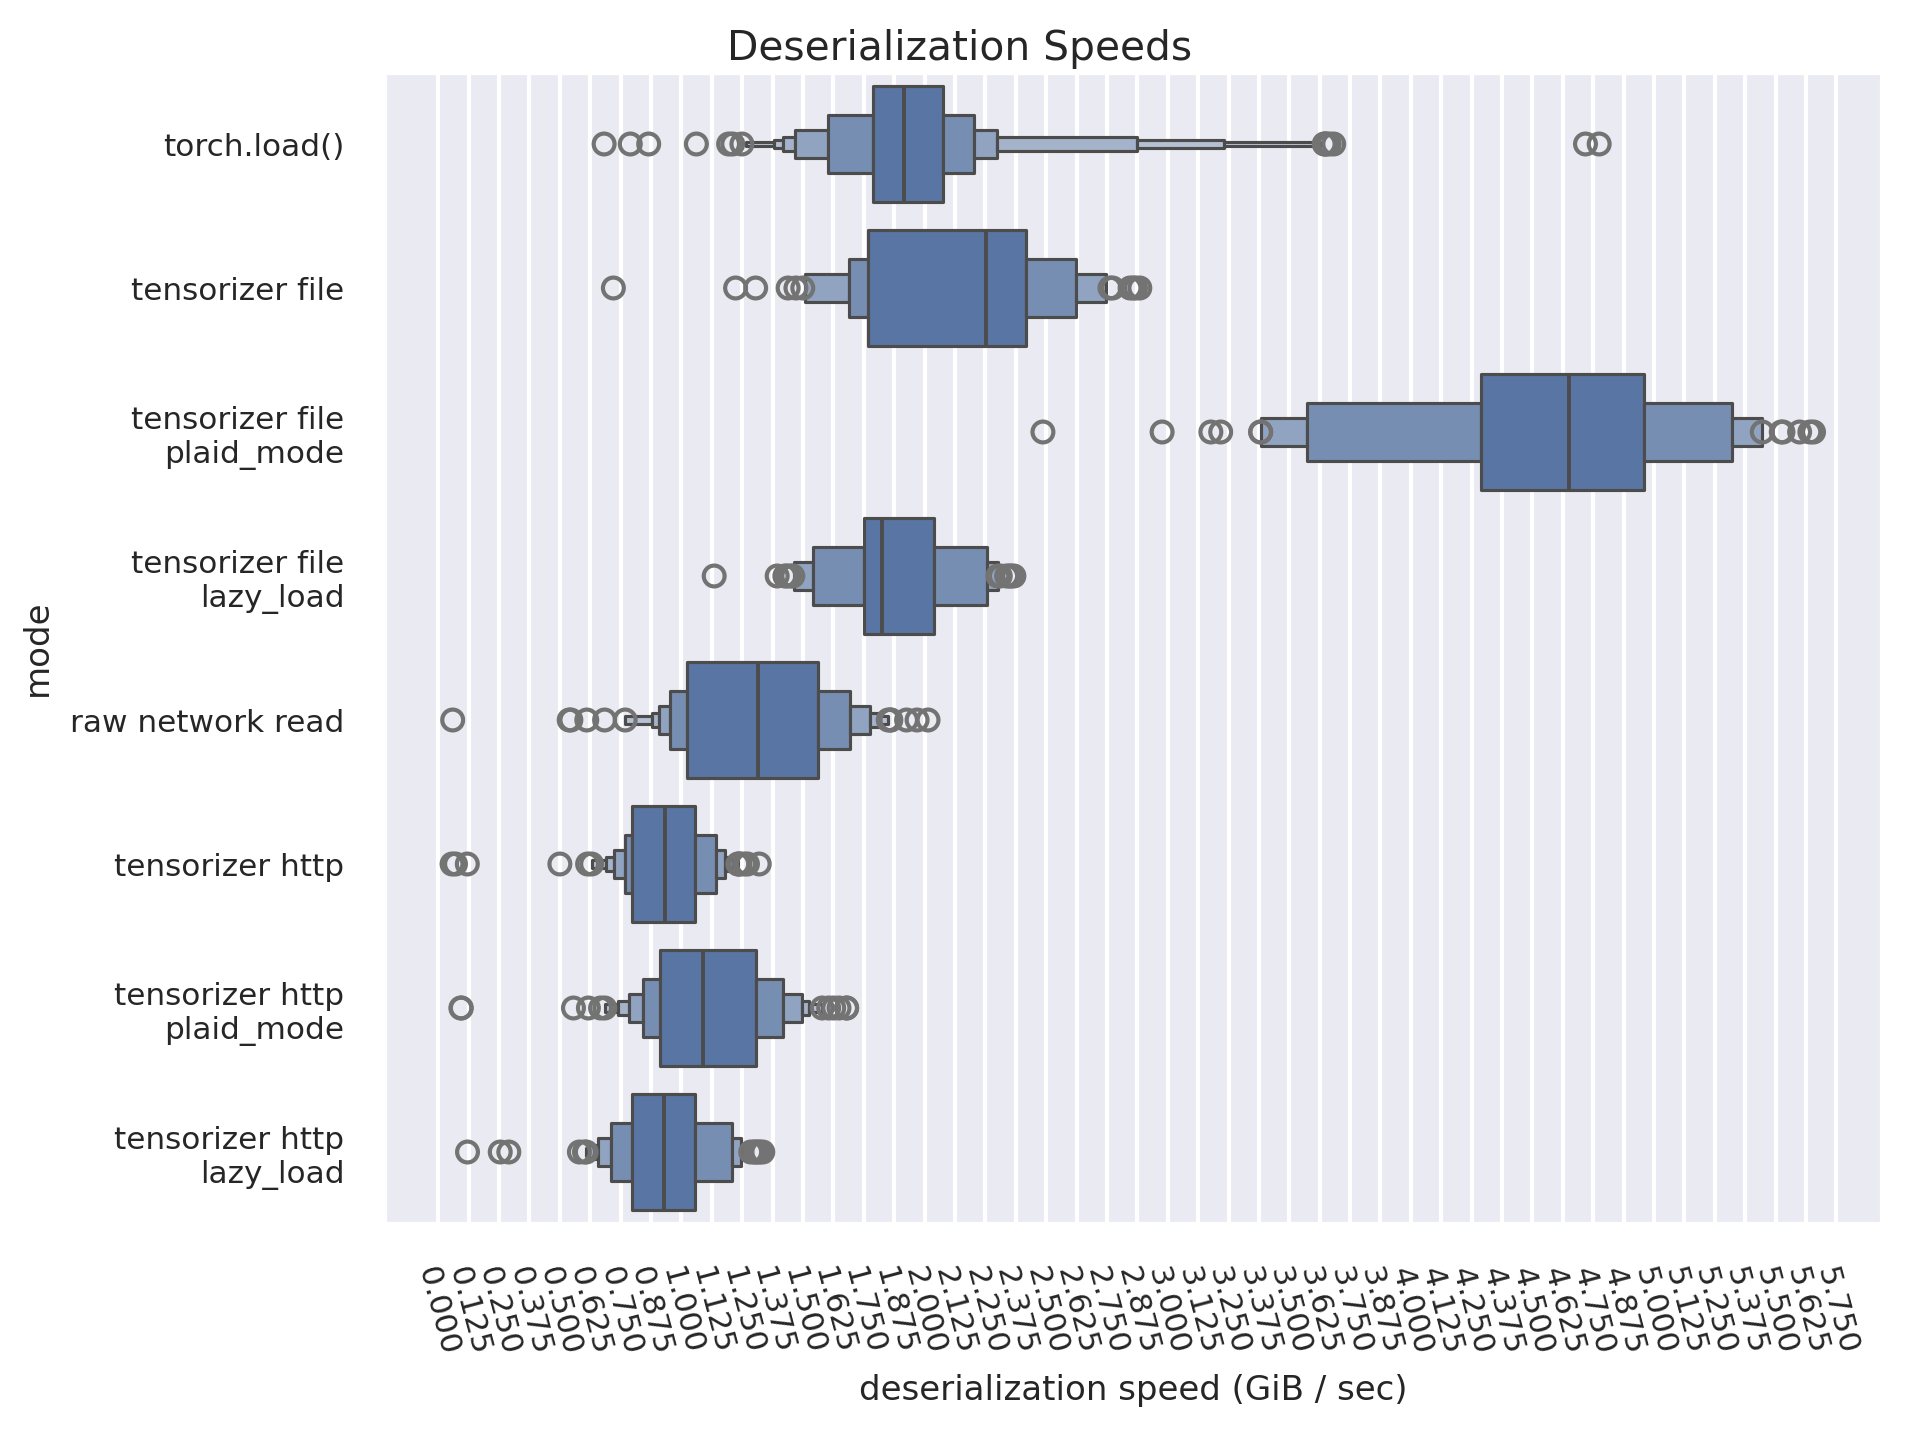 A letter-value plot comparing 7 deserialization modes and their respective deserialization speeds with a granularity of 0.125 GiB/sec. For local files, "torch.load()" has a median speed between 1.875 and 2.000 GiB/sec; "tensorizer file" has a median of 2.250; "tensorizer file, plaid_mode" has a median of about 4.625; "tensorizer file, lazy_load" has a median between 1.750 and 1.875. The raw network speed is also listed on the chart with a median between 1.250 and 1.375. For HTTP streaming, "tensorizer http" has a median between 0.875 and 1.000; "tensorizer http, plaid_mode" has a median between 1.000 and 1.125; and "tensorizer http, lazy_load" has a median between 0.875 and 1.000.